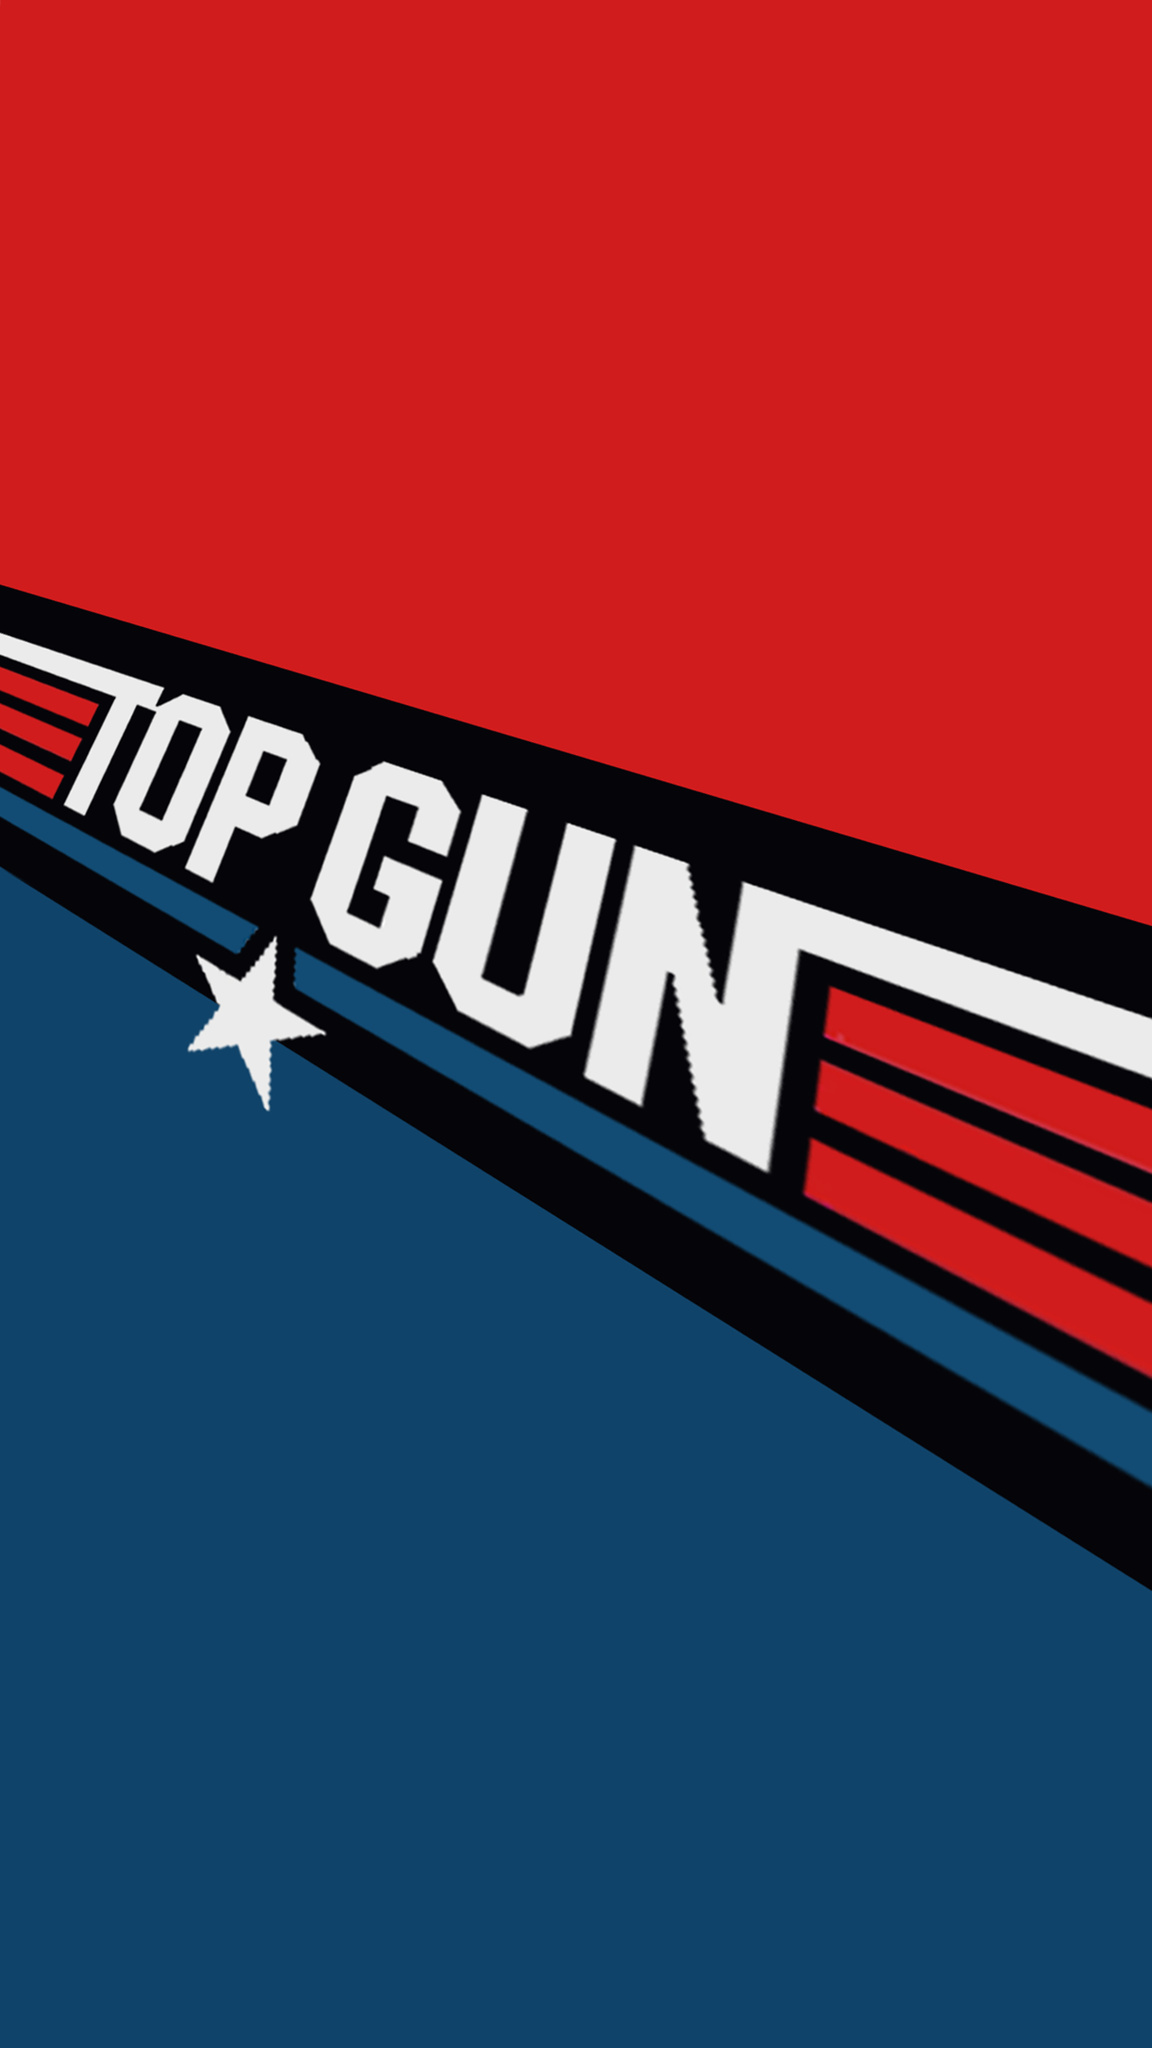 Top Gun, Film appreciation, Memorable moments, Admired by many, 1160x2050 HD Phone